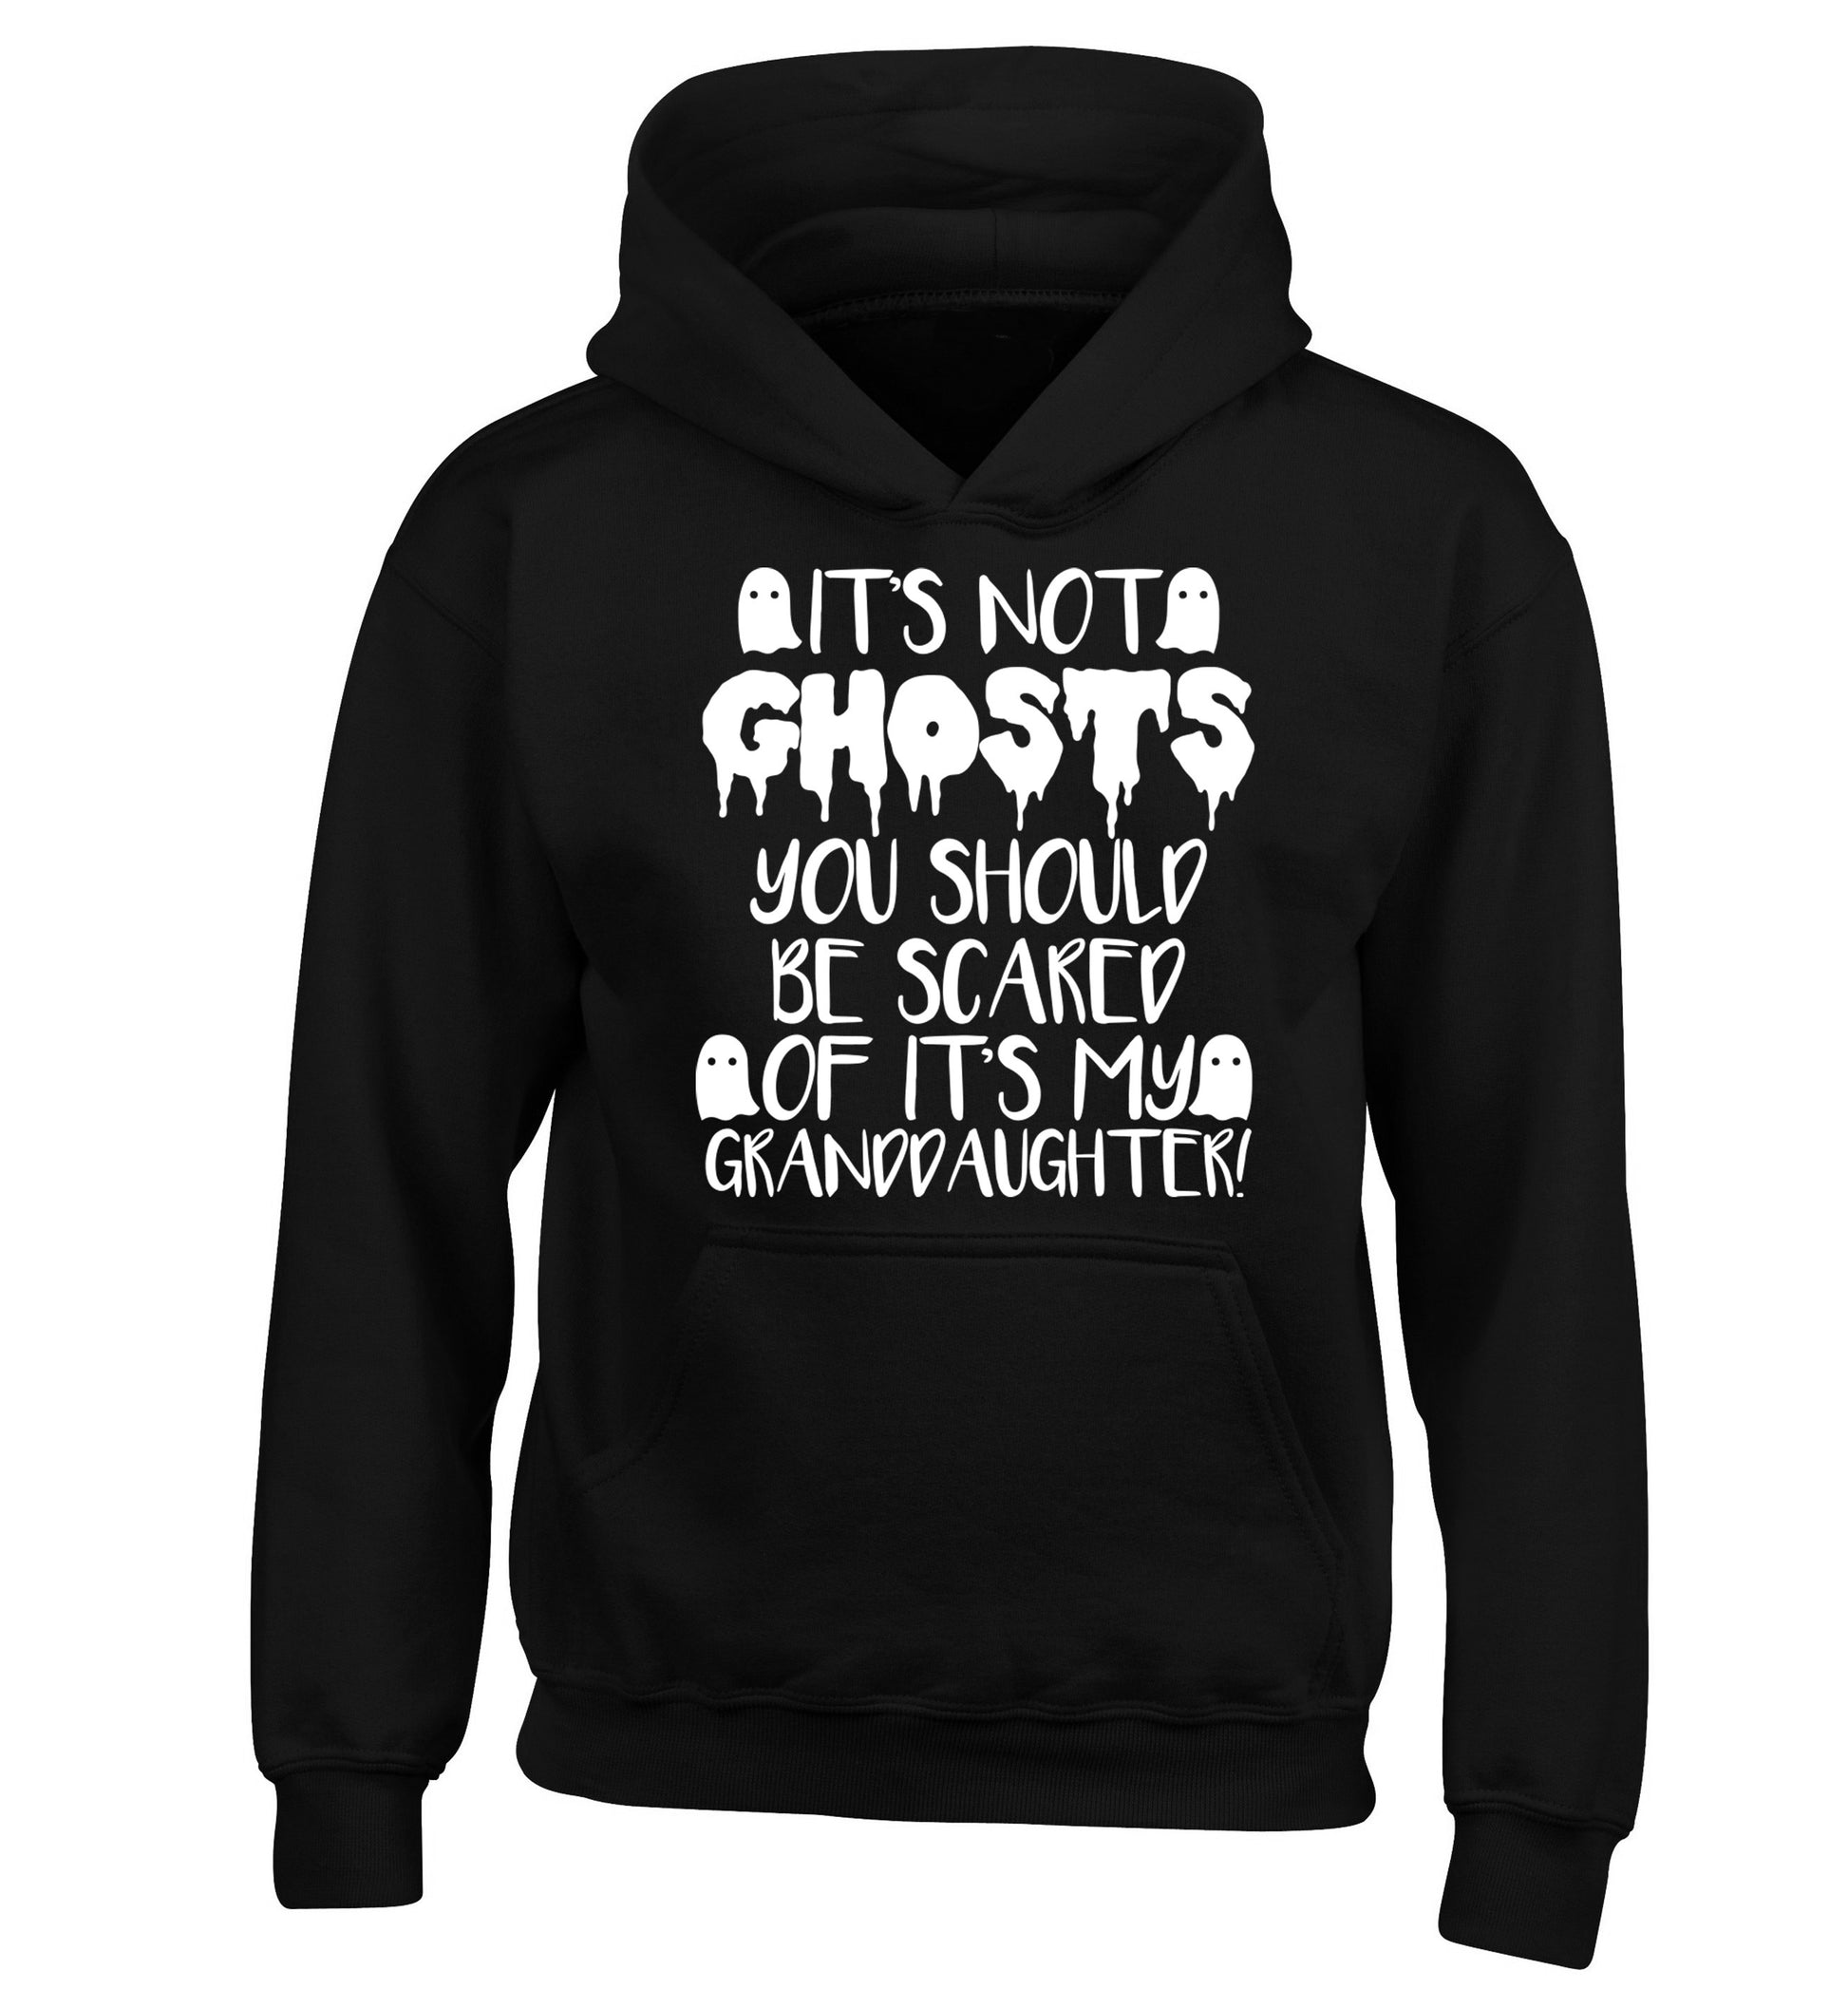 It's not ghosts you should be scared of it's my granddaughter! children's black hoodie 12-14 Years